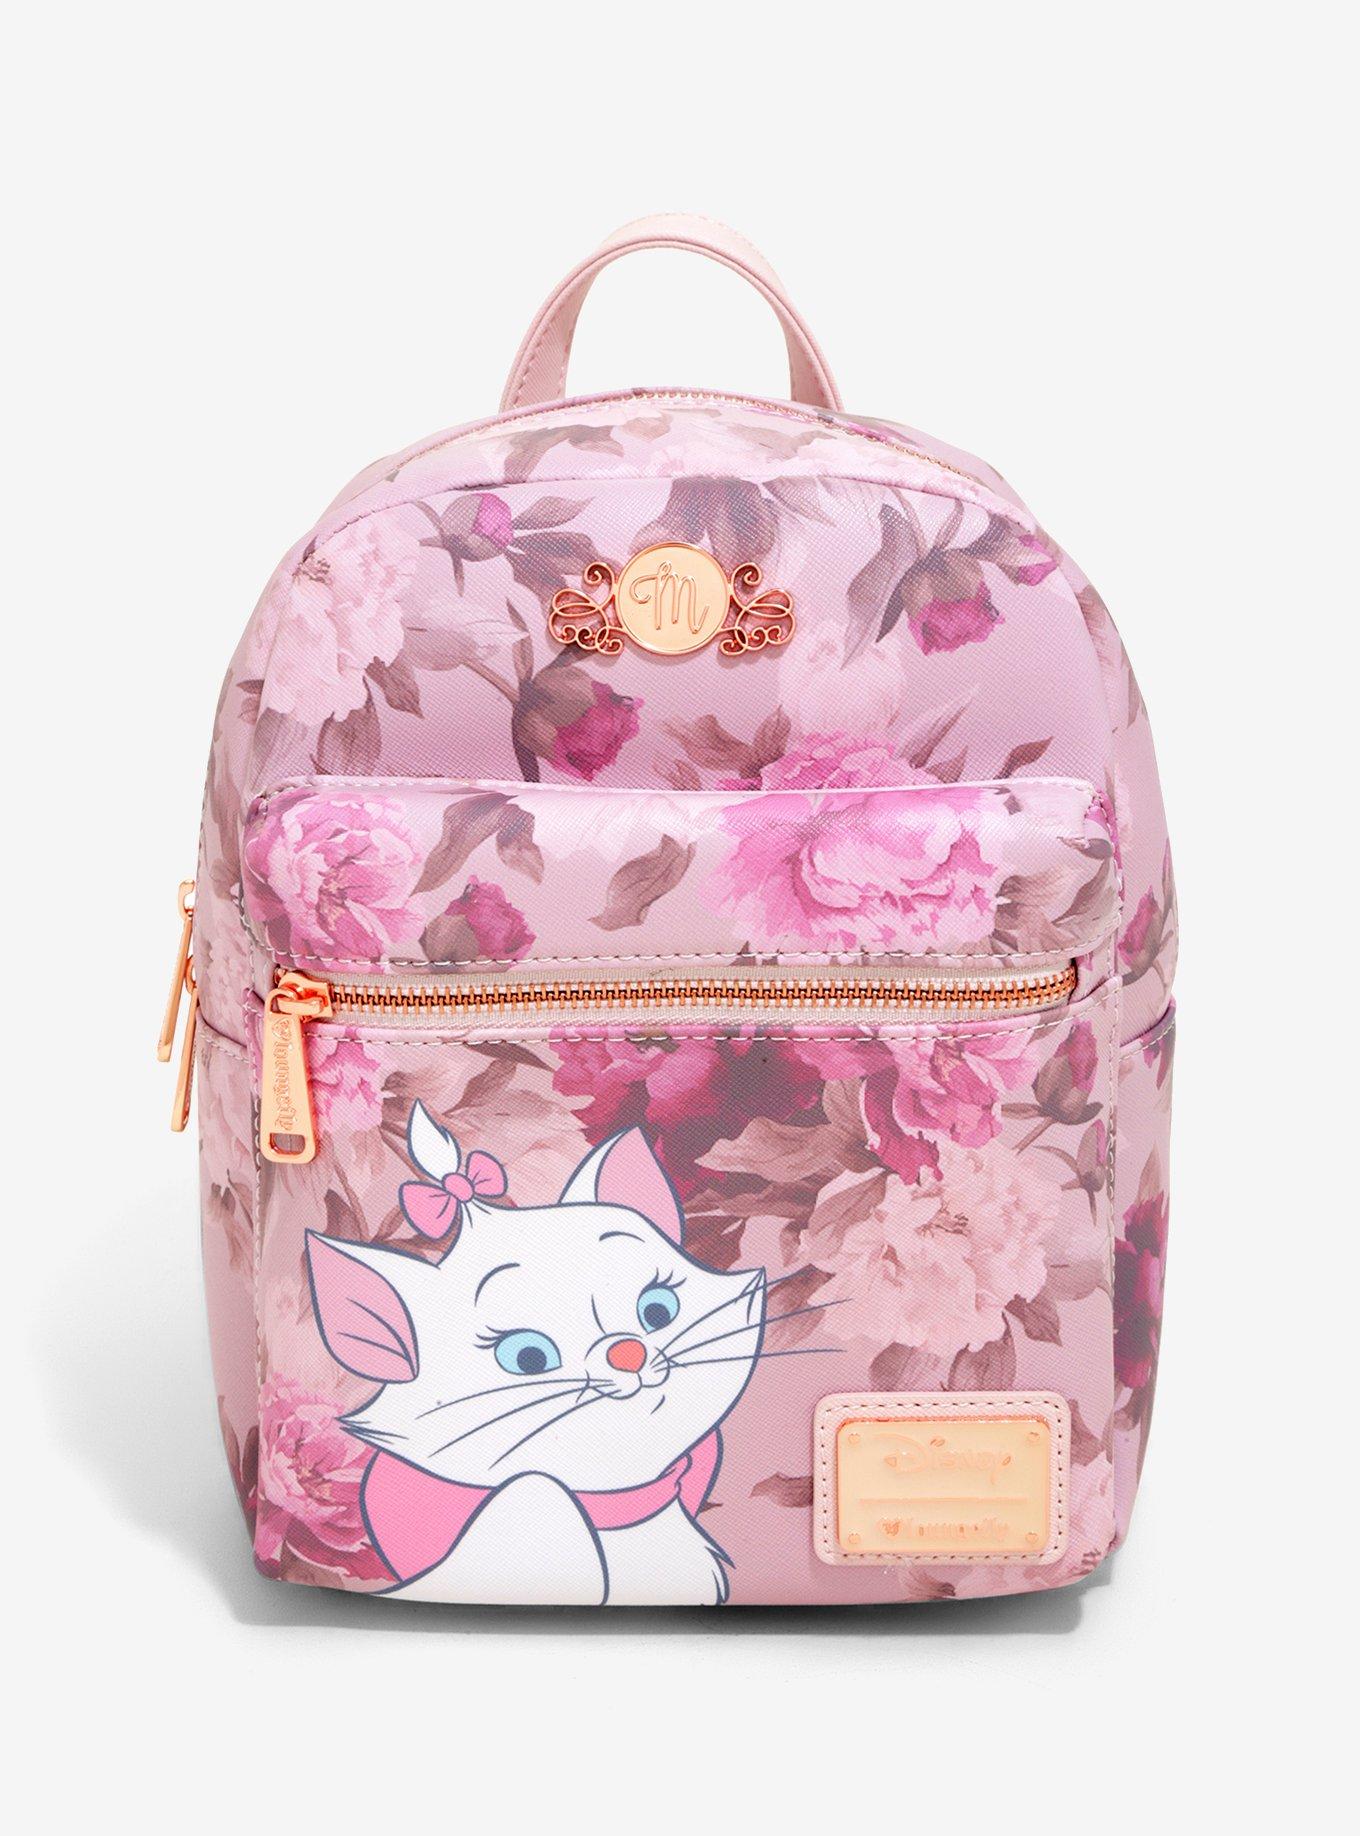 Buy The Aristocats Marie House Mini Backpack at Loungefly.